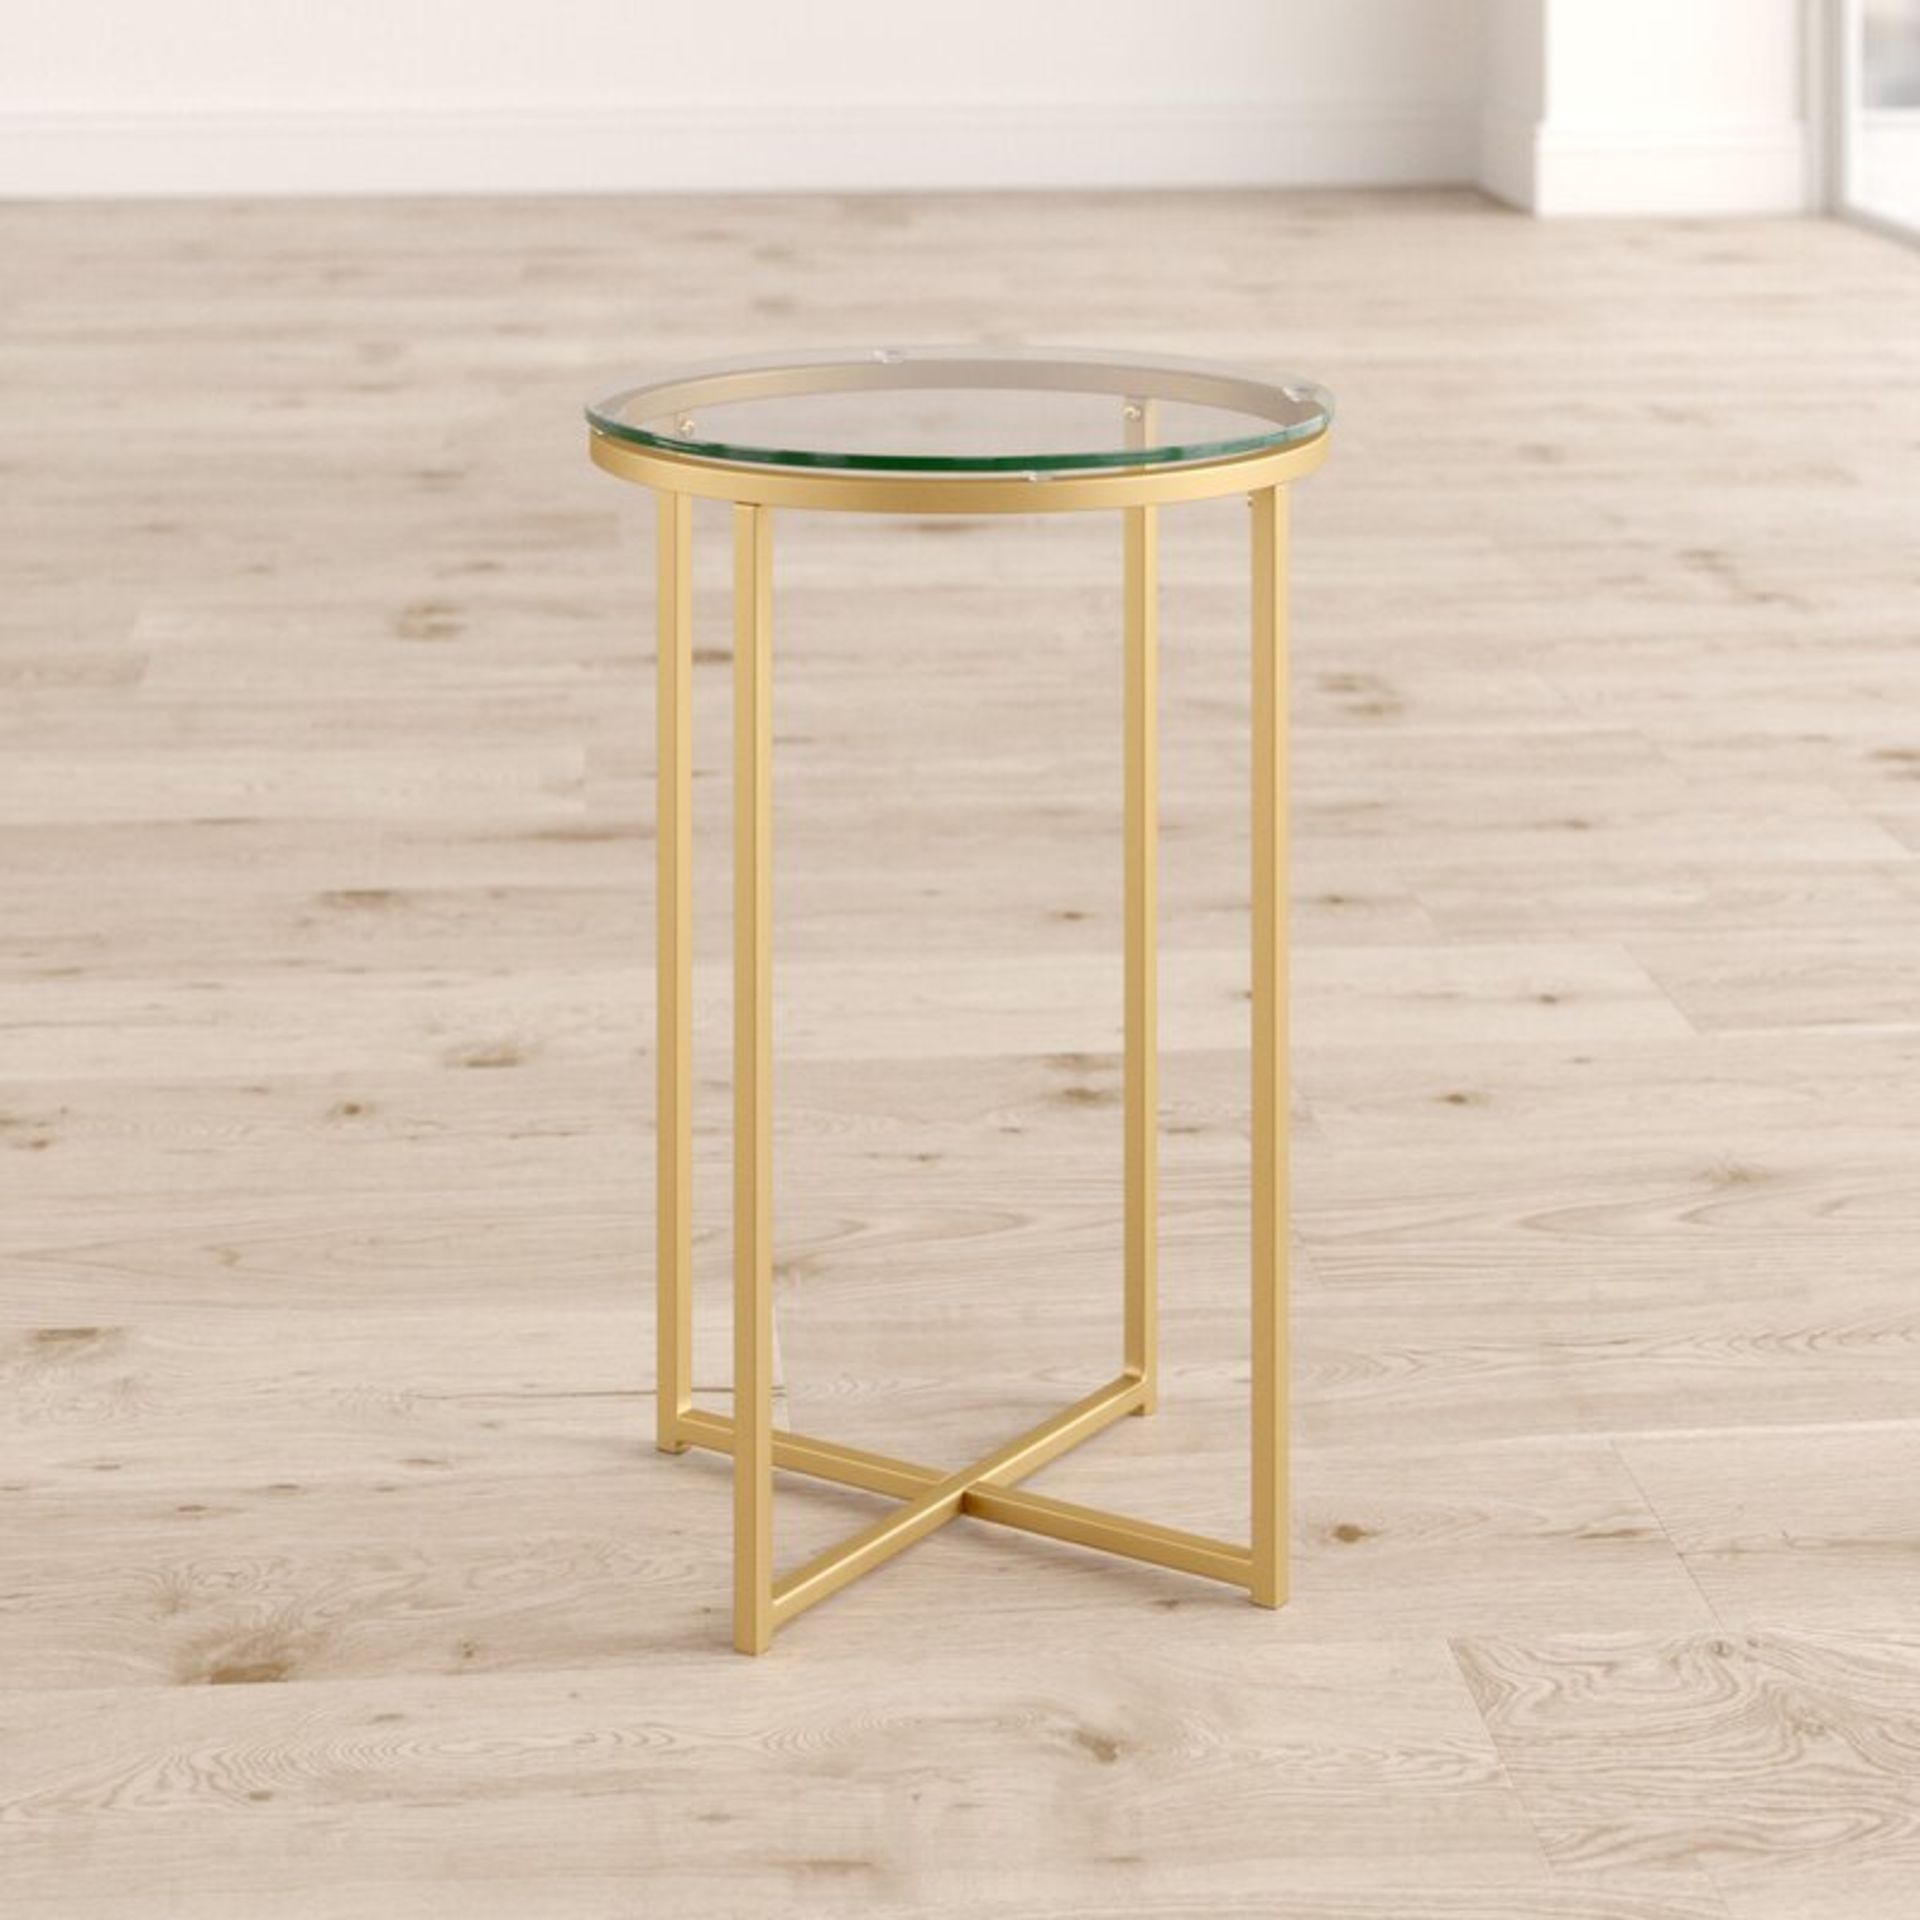 Leverette Side Table - RRP £59.99 - Image 5 of 5